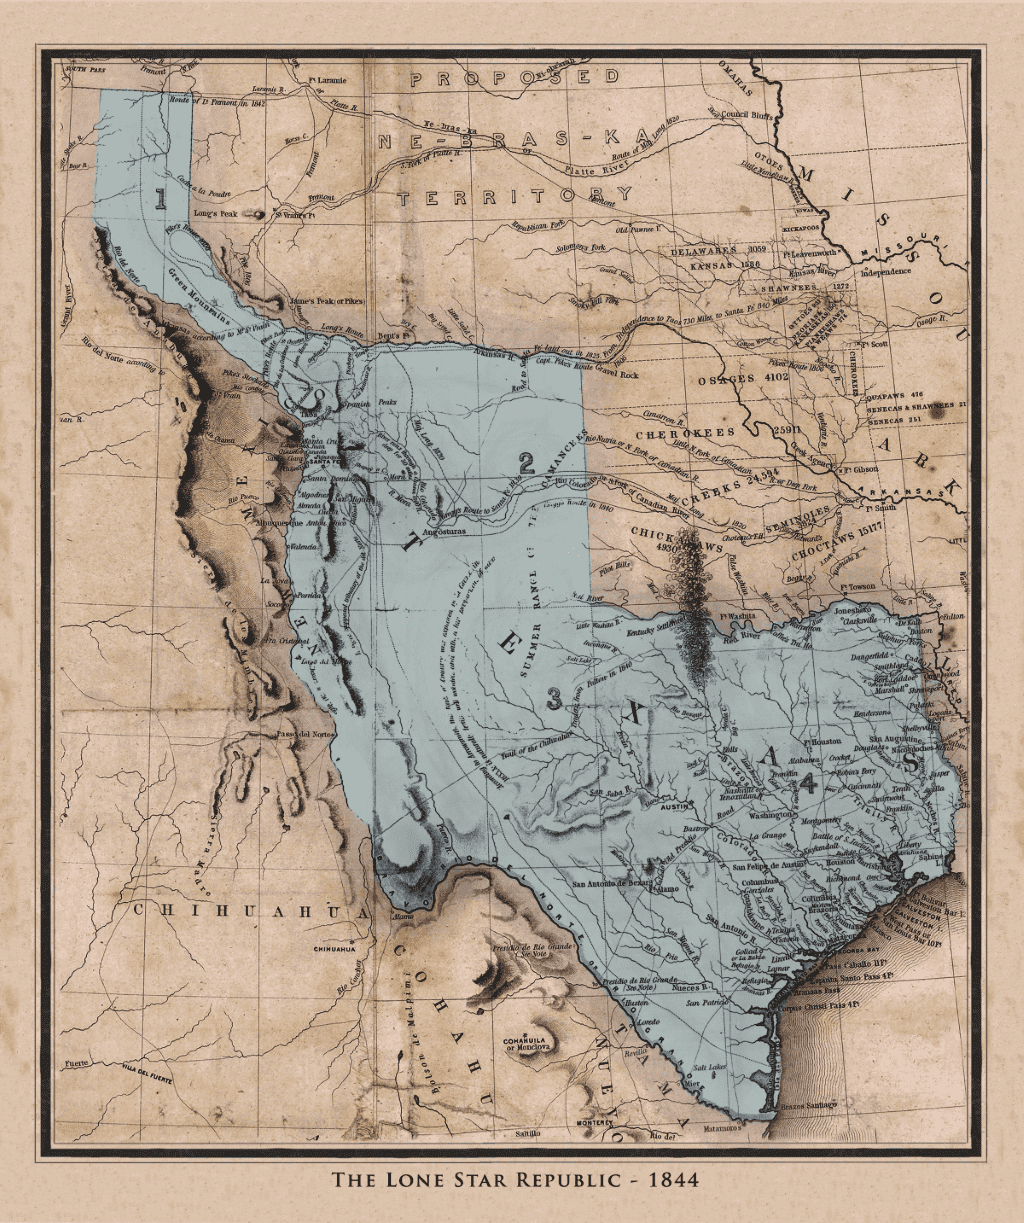 Emory's Republic of Texas Map - 1844